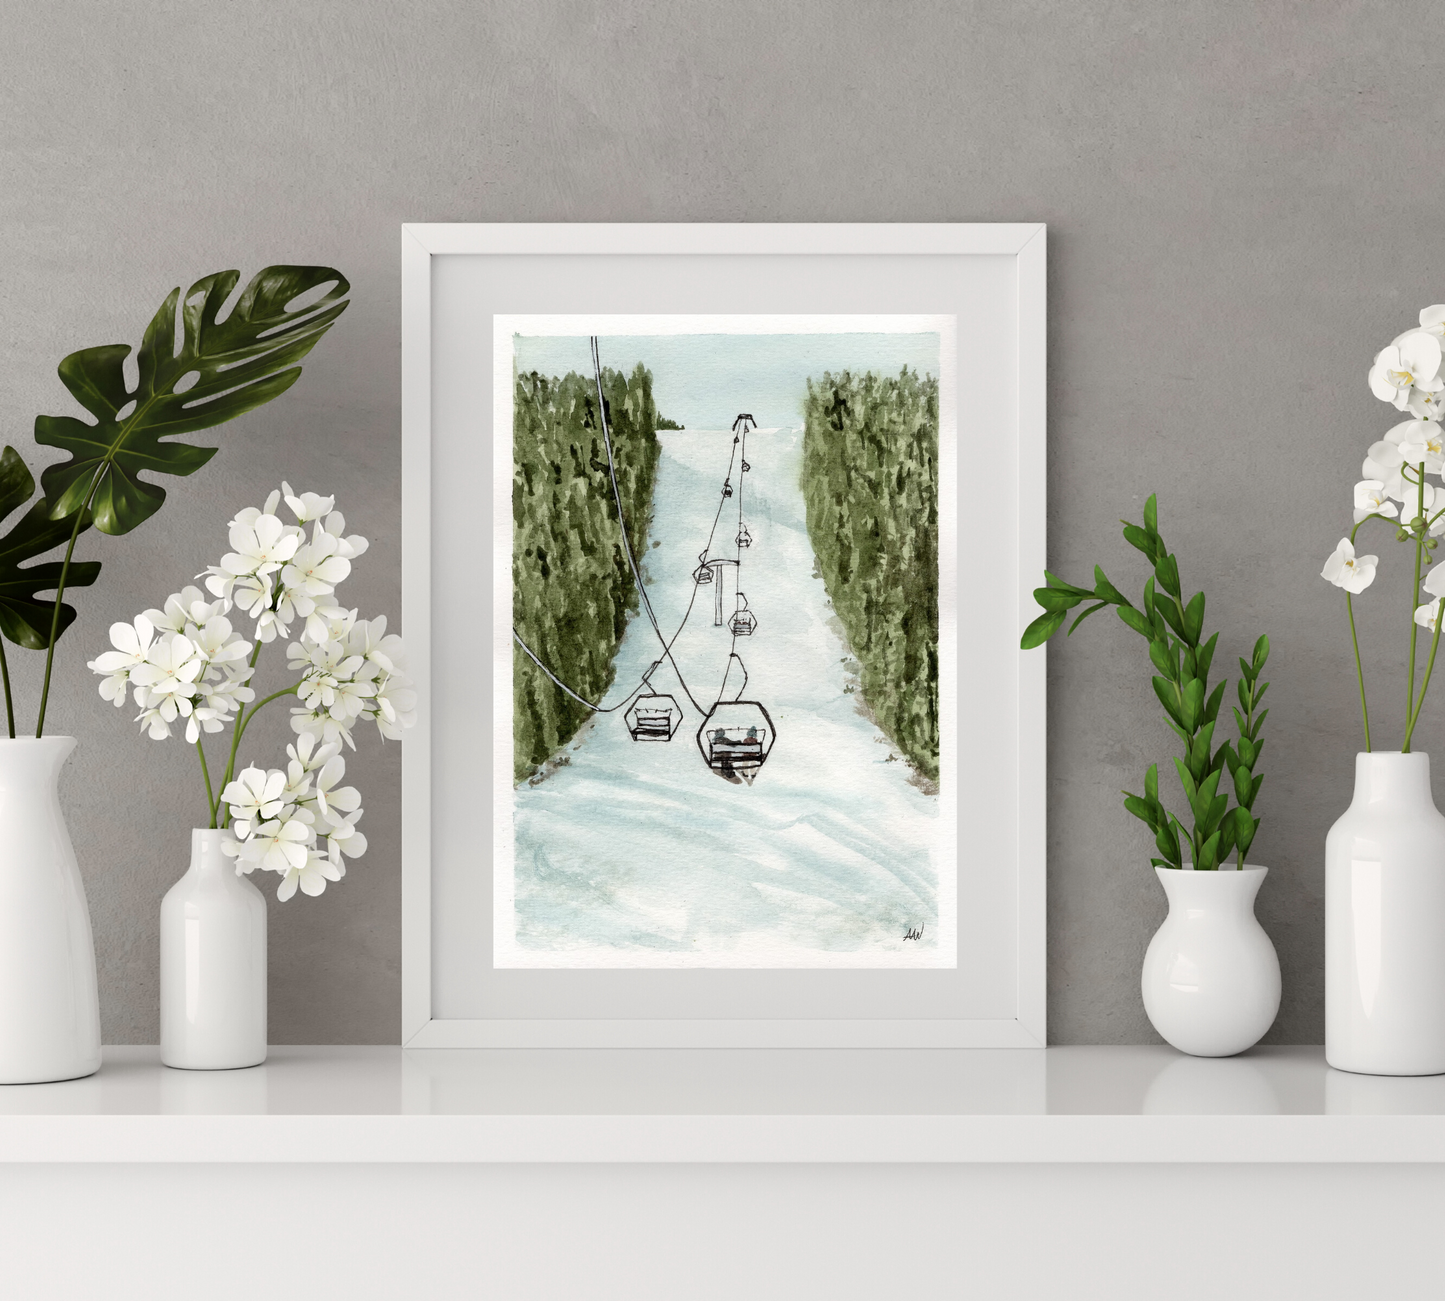 Skiing through the Pines - Pen and Watercolor Painting - Archival Quality Art Print